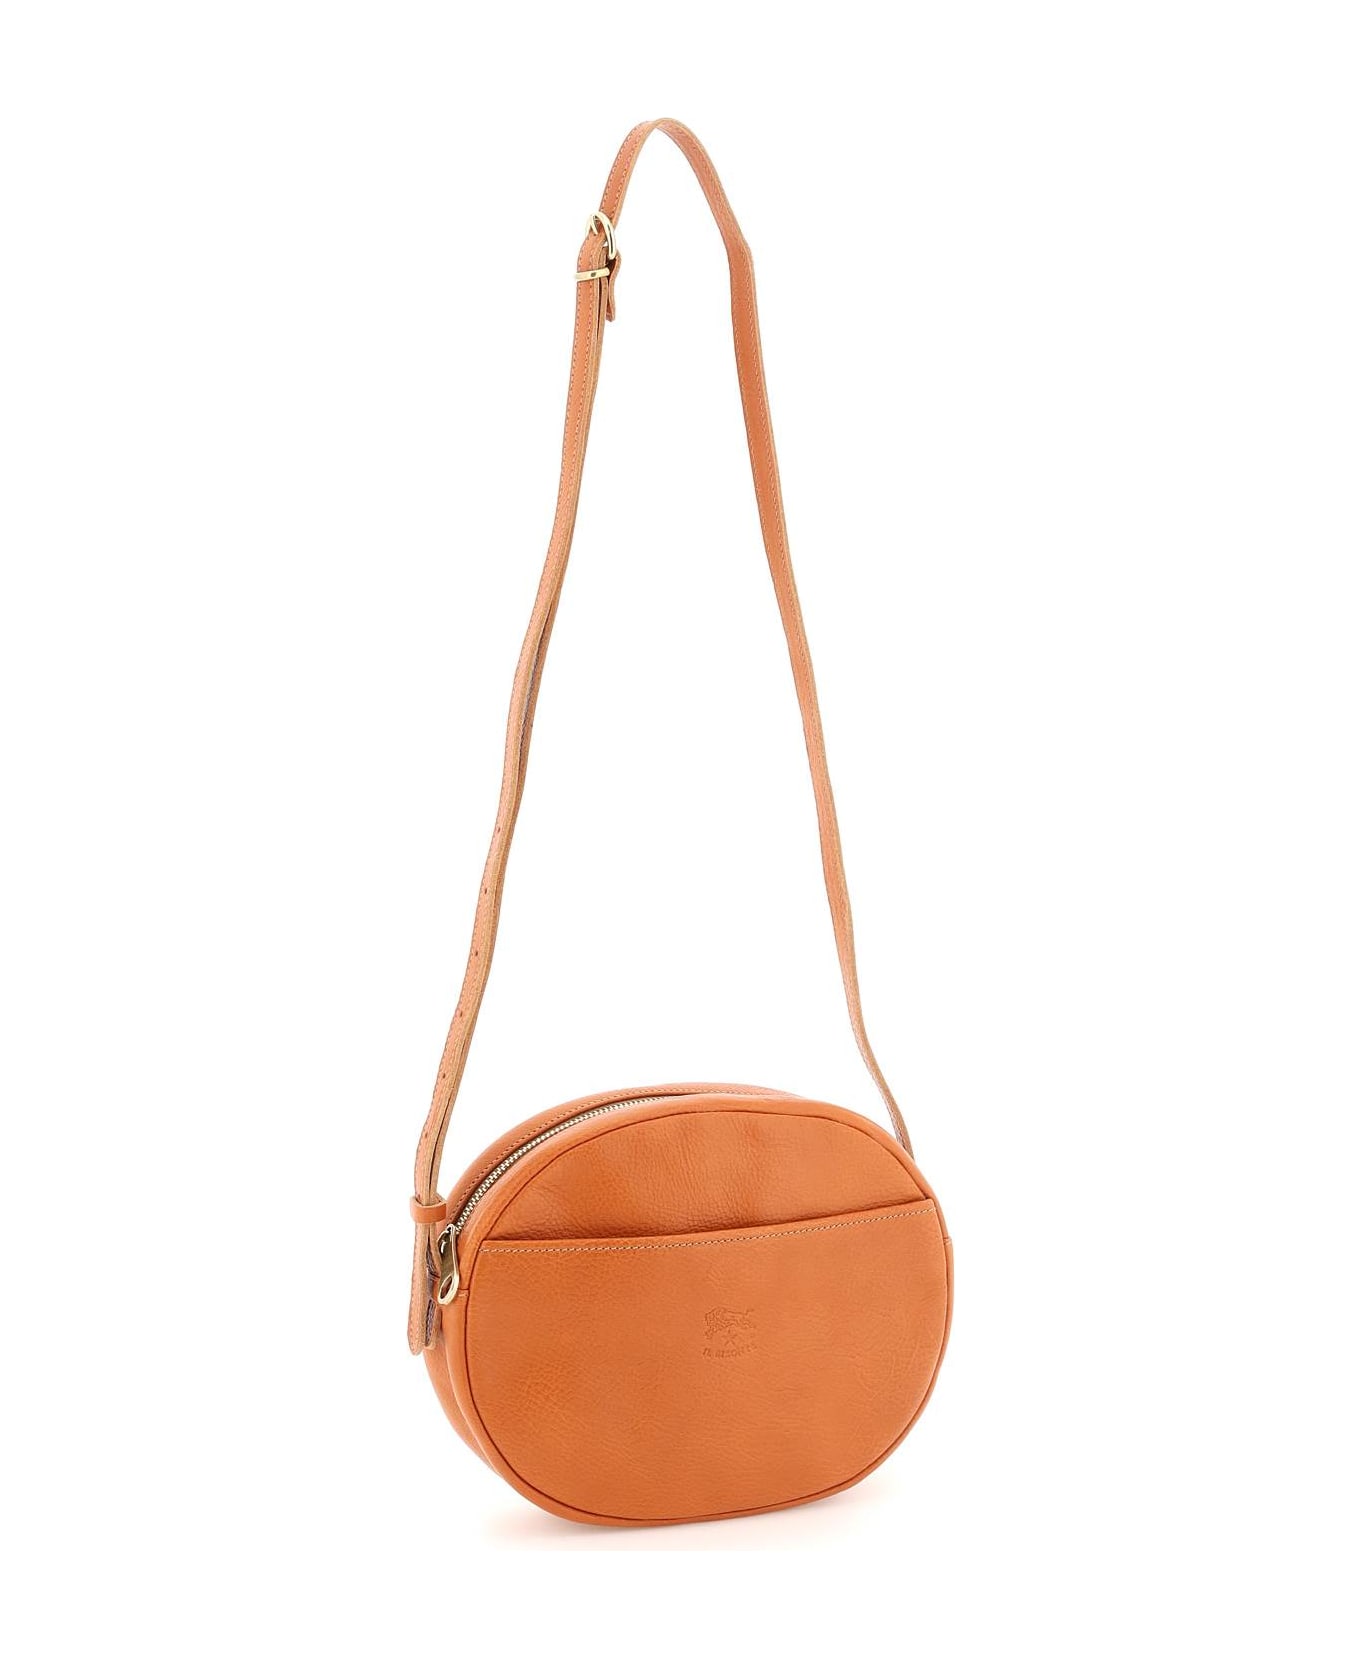 Il Bisonte Grained Leather Crossbody Bag - CARAMEL (Brown)